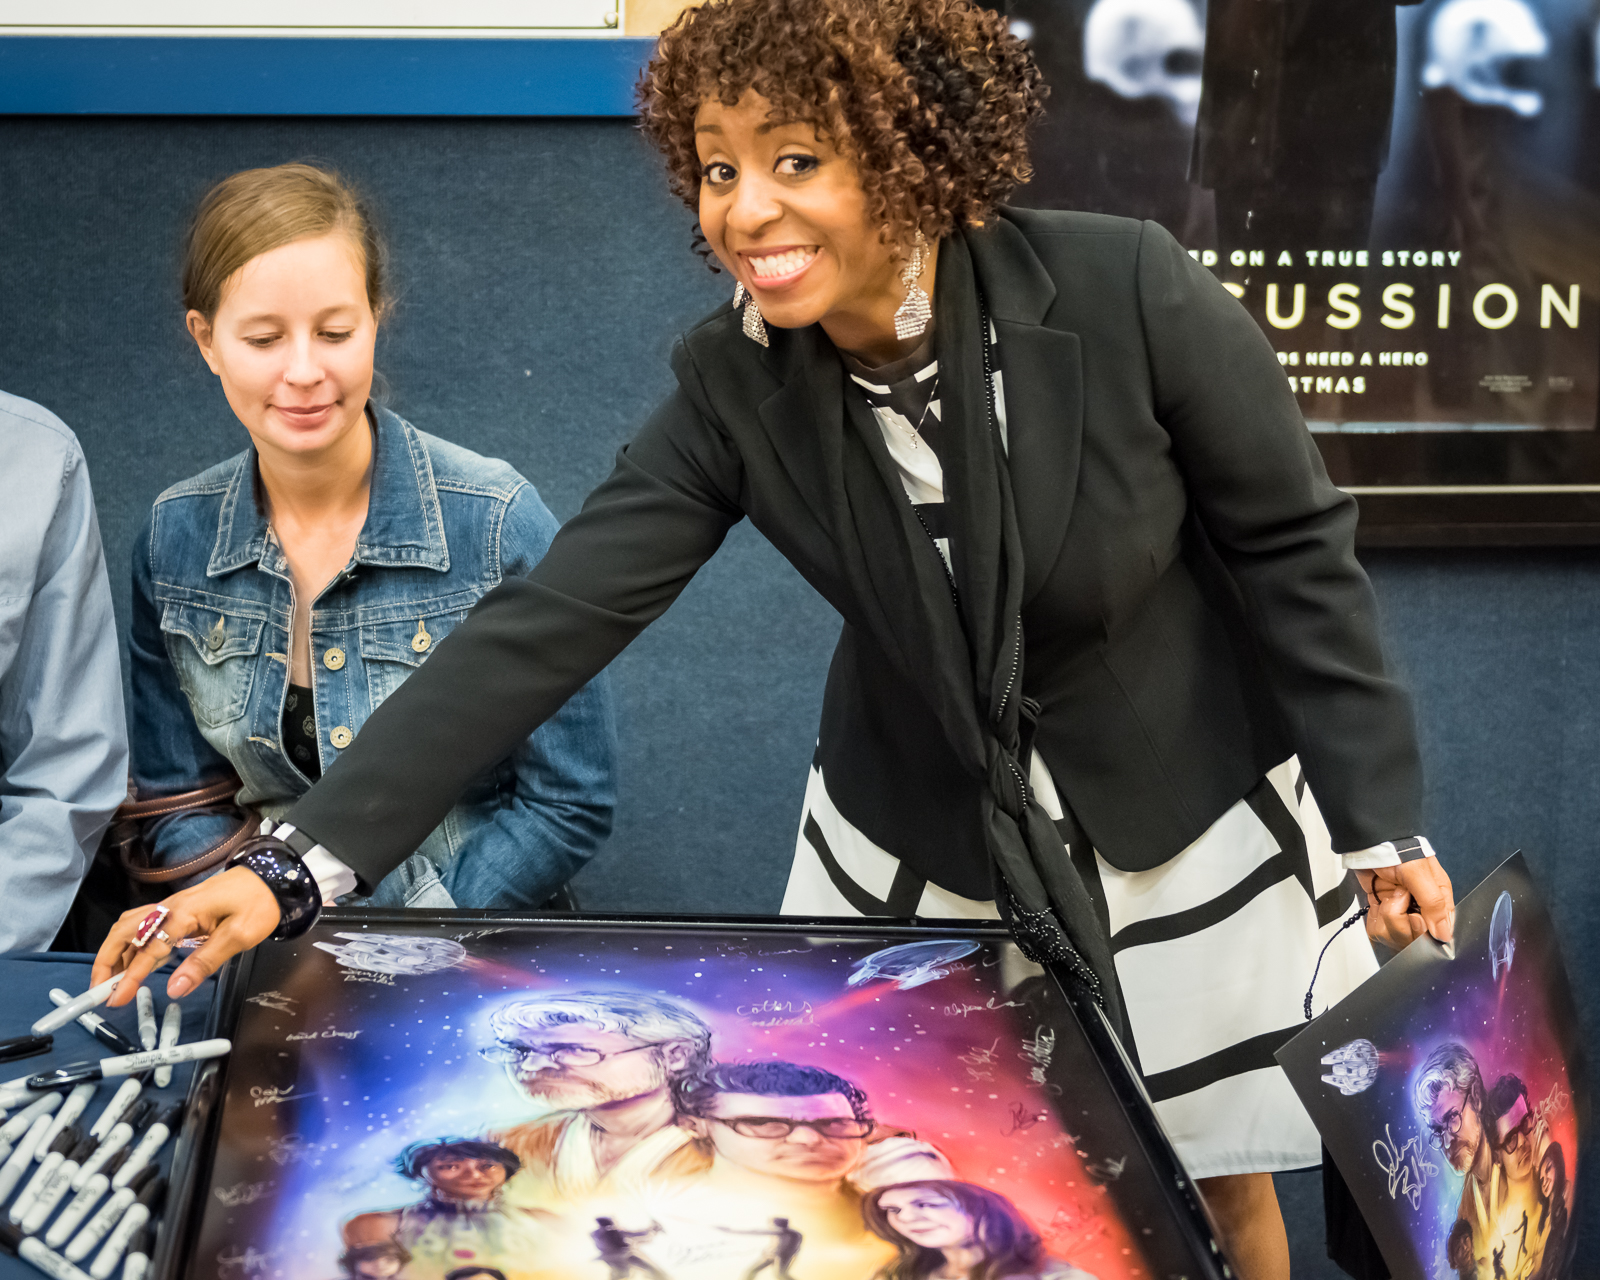 12/2/15 - STAR TREK WARS Premiere & poster signing. Role: Mellody Hobson (George Lucas' wife)